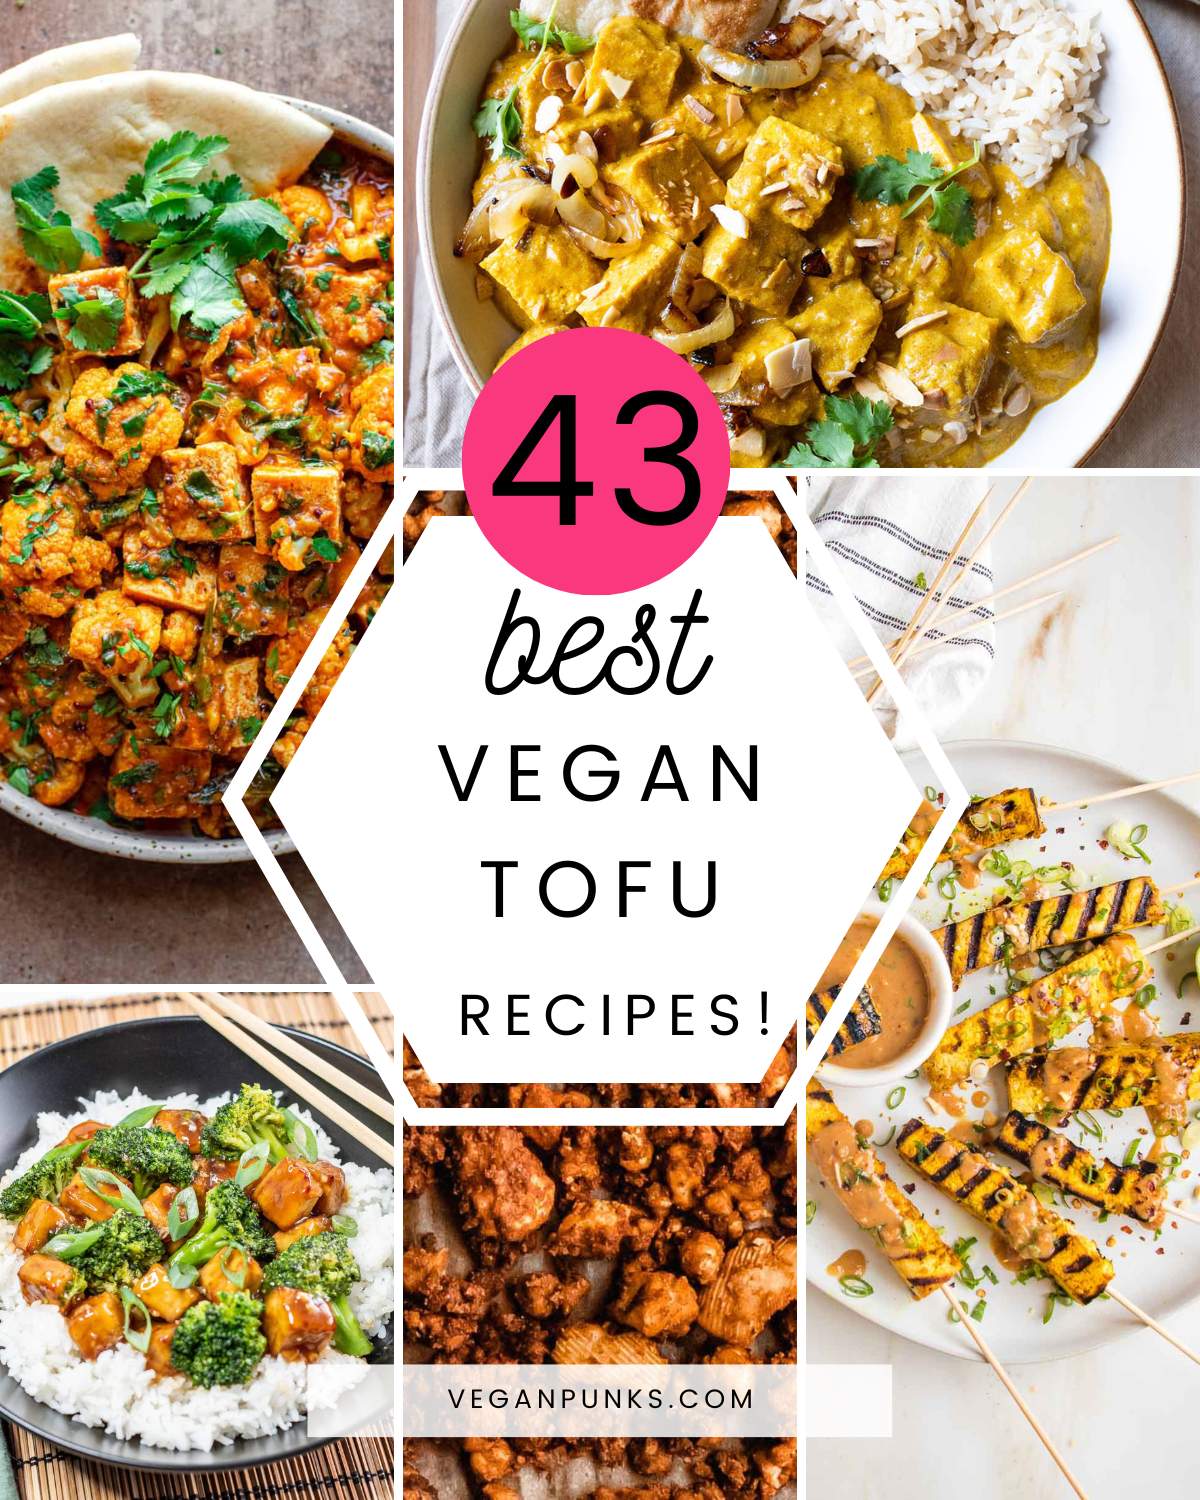 Collage of vegan tofu recipes with a title in the middle.